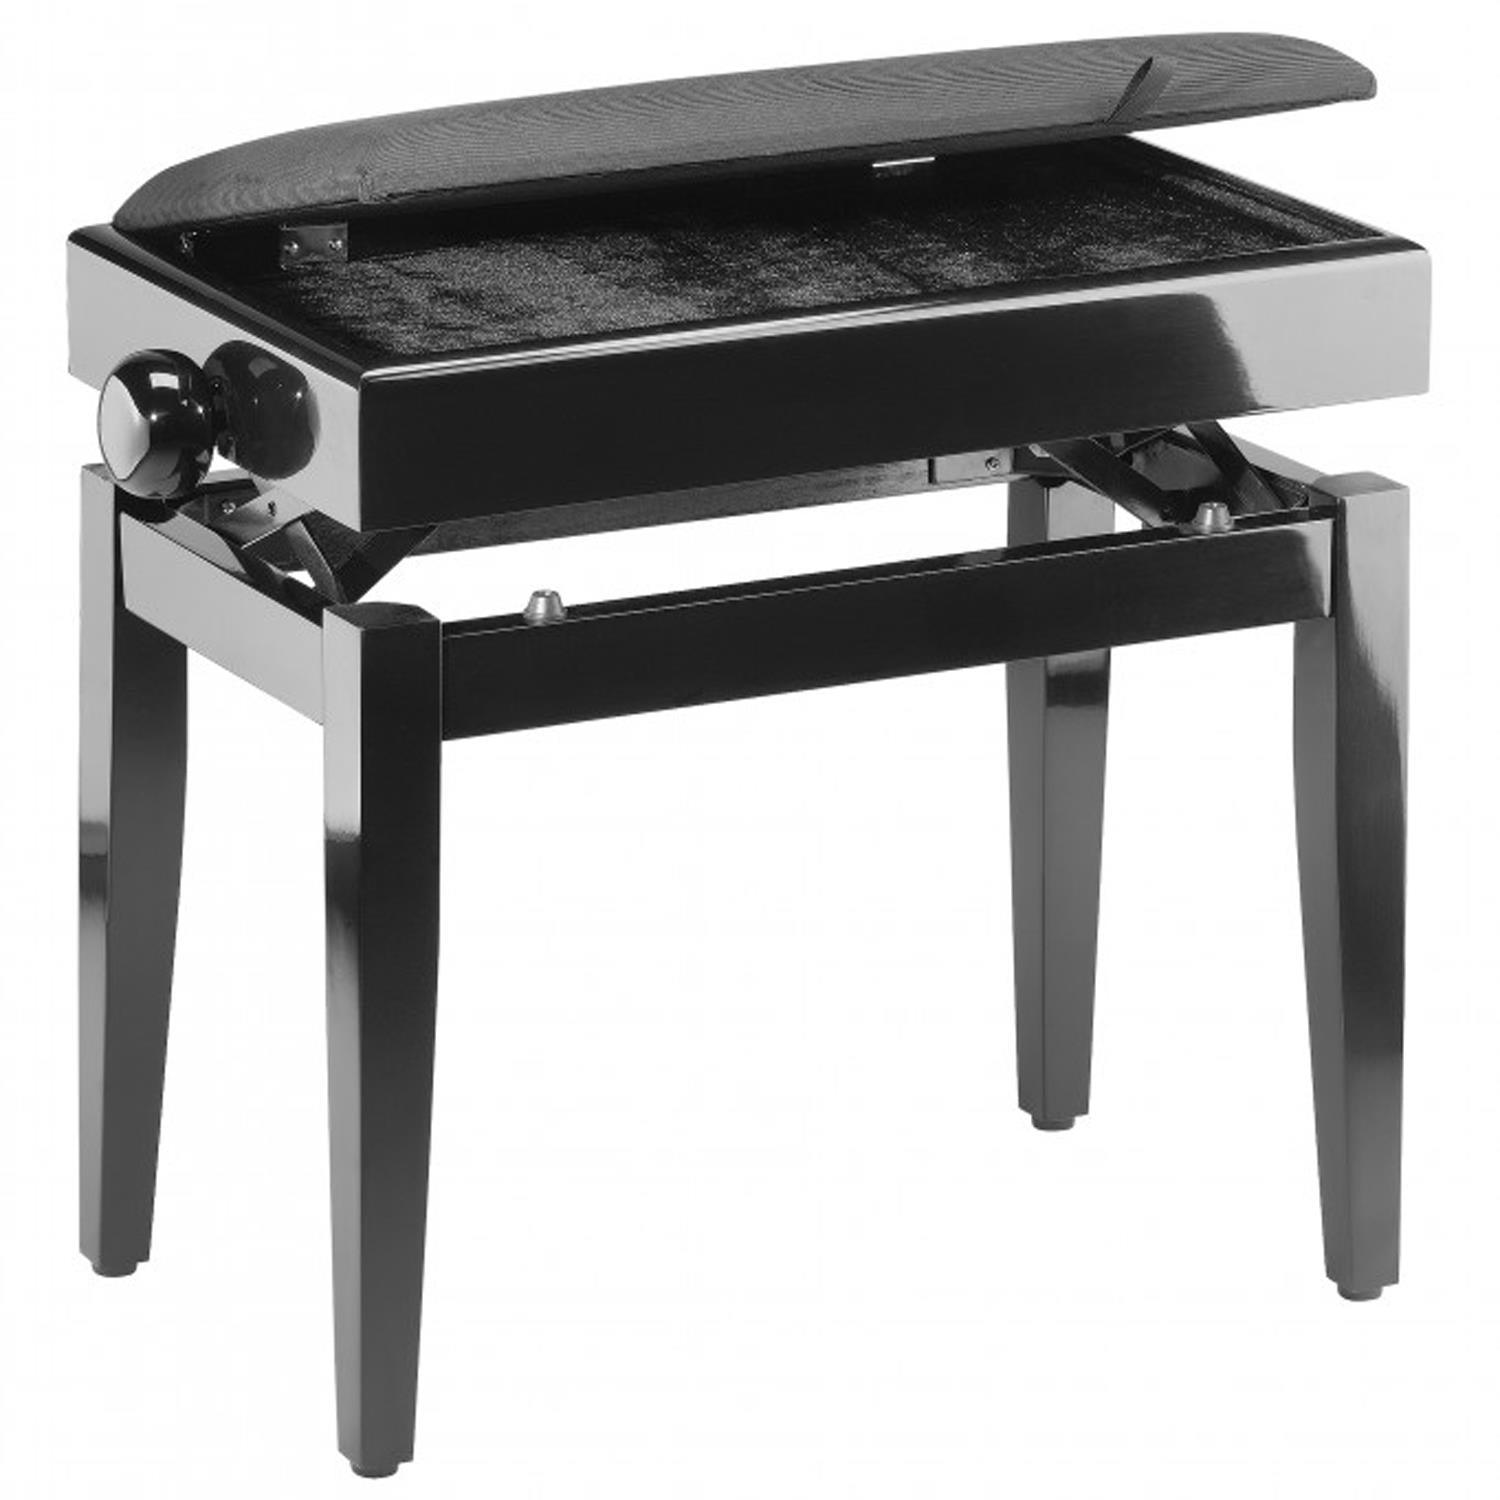 Stagg PB55 BKP VBK Gloss Black Piano Bench with Velvet Top - DY Pro Audio